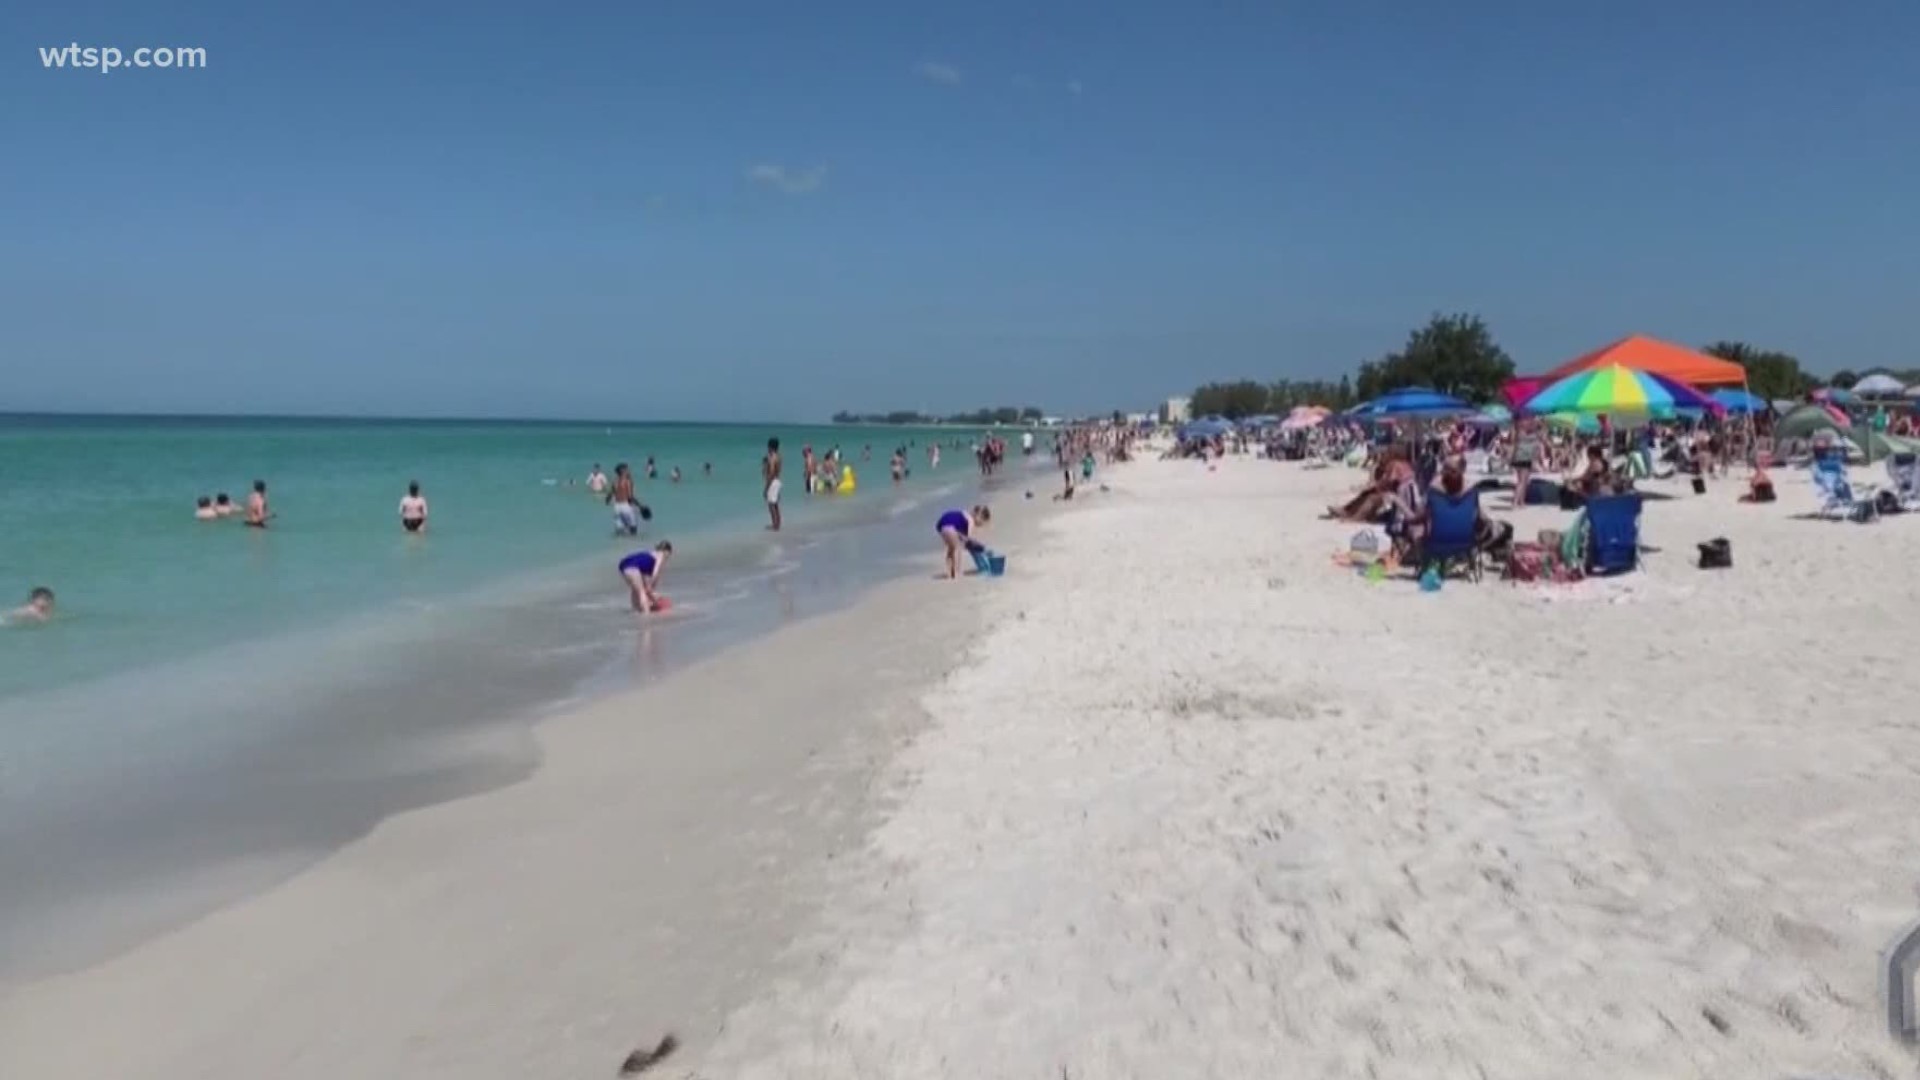 The sheriff says they’ve been able to keep people safely distanced, but the health consequences of letting people back onto the sand might not be known for weeks.